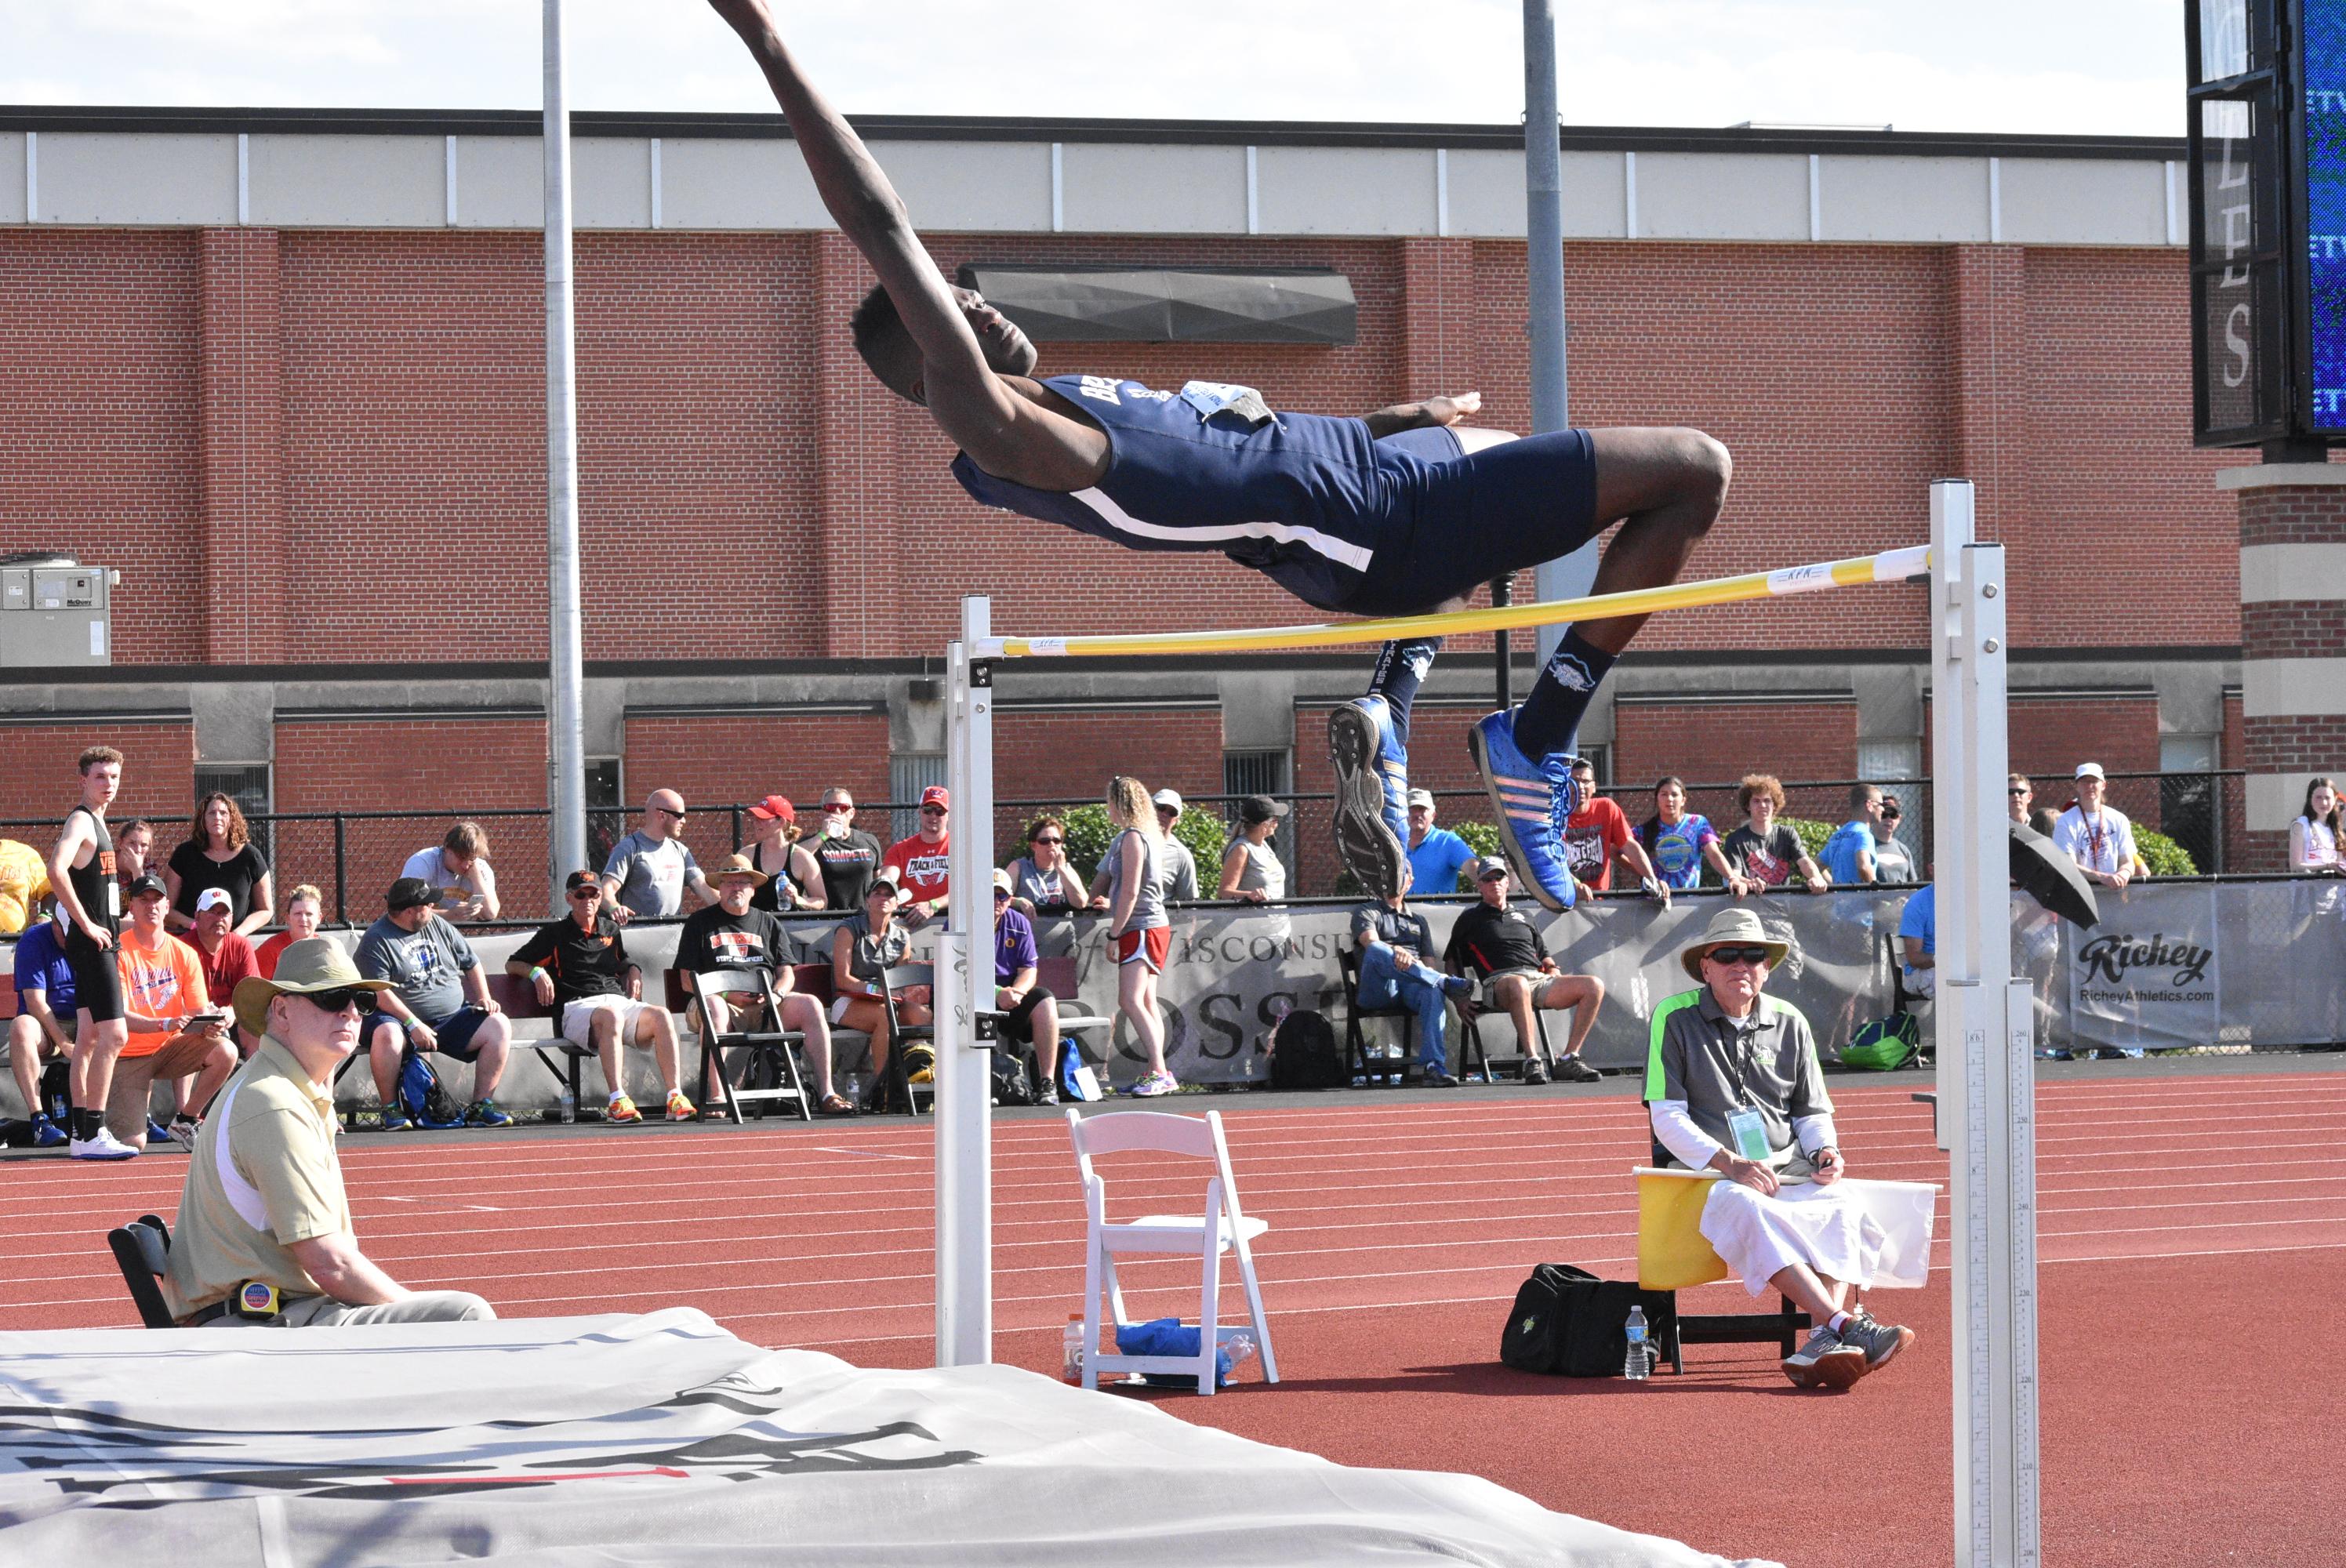 Tinch enjoys successful start at state track and field meet | WCWF